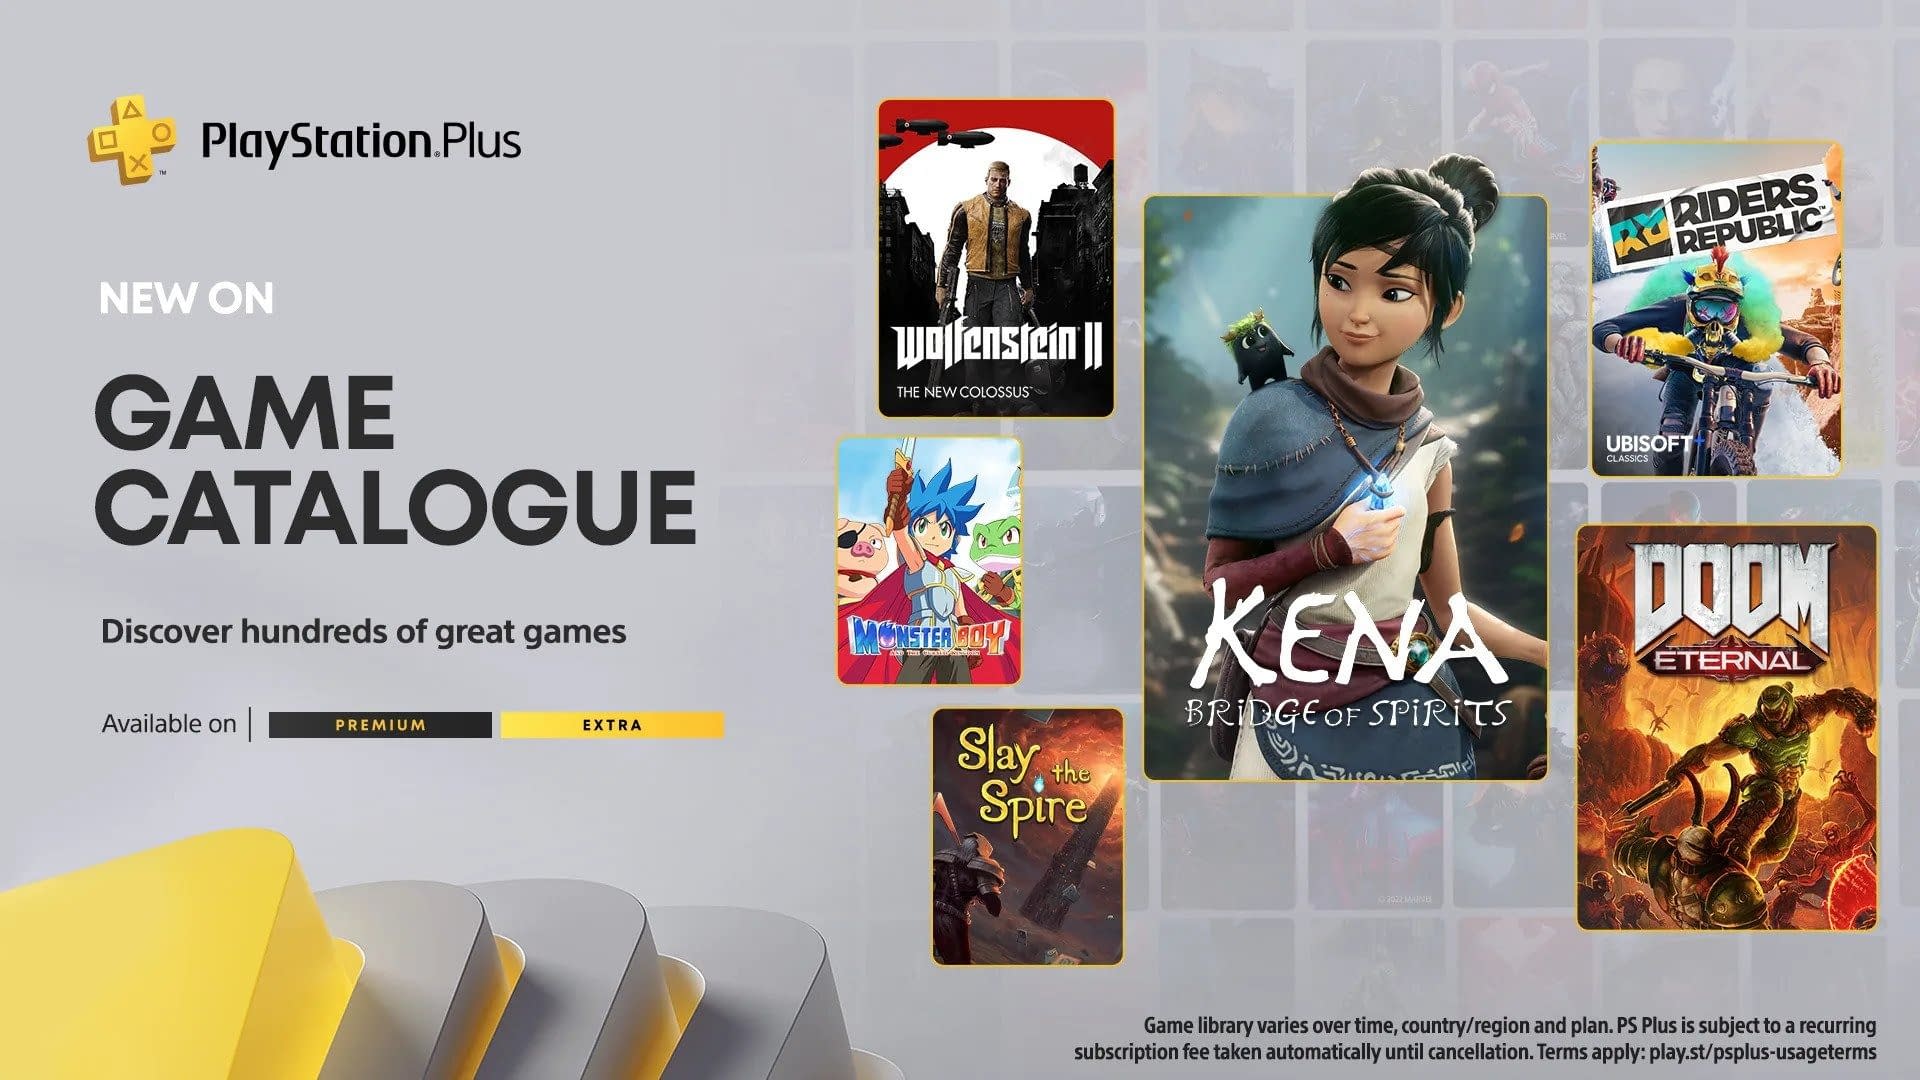 Playstation Plus announced upcoming games in April